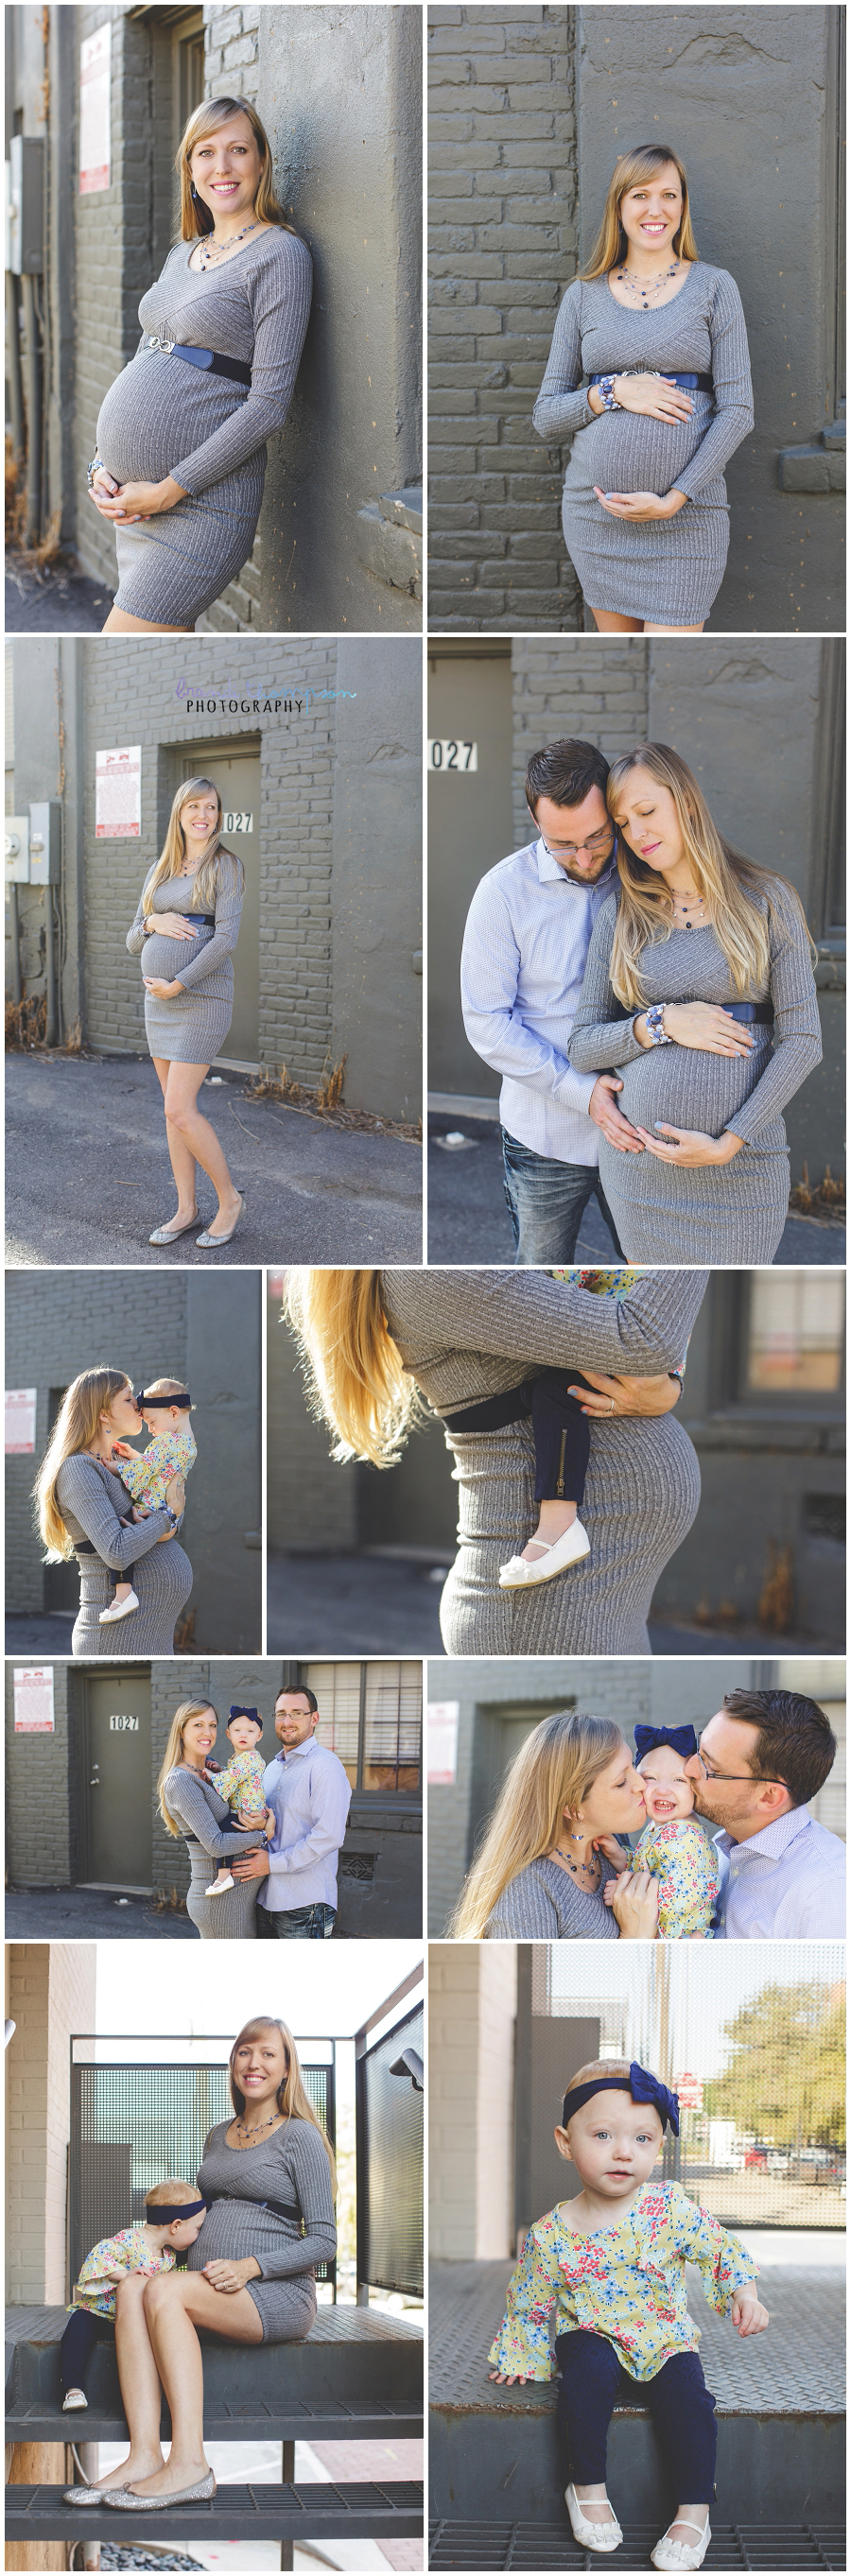 maternity photography in downtown plano, tx